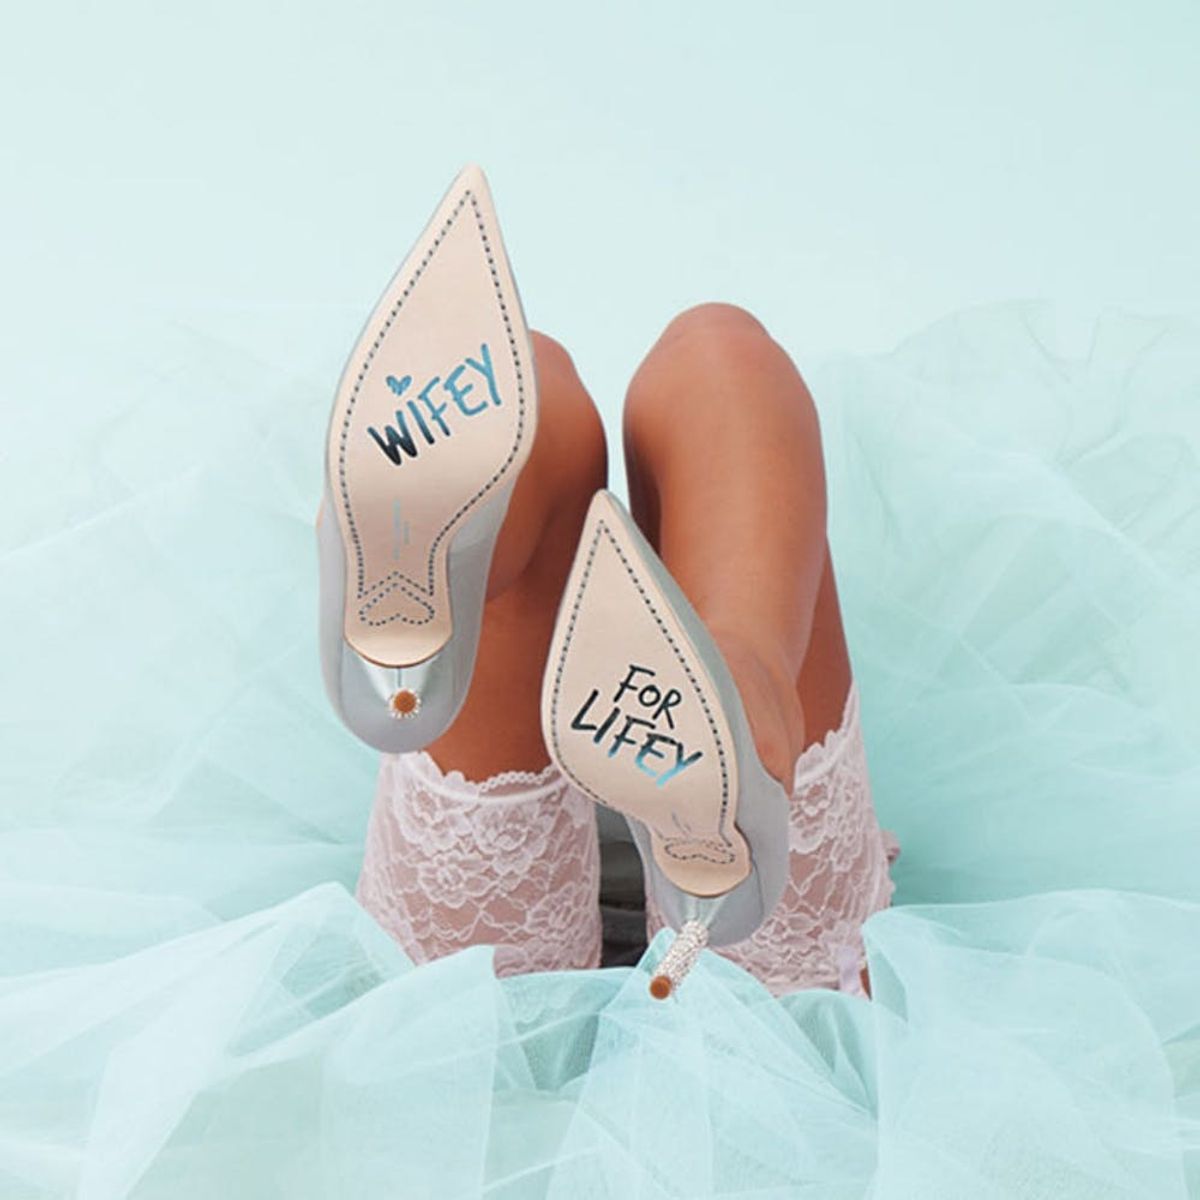 These New Designer Wedding Shoes Are Every Bride’s Dream